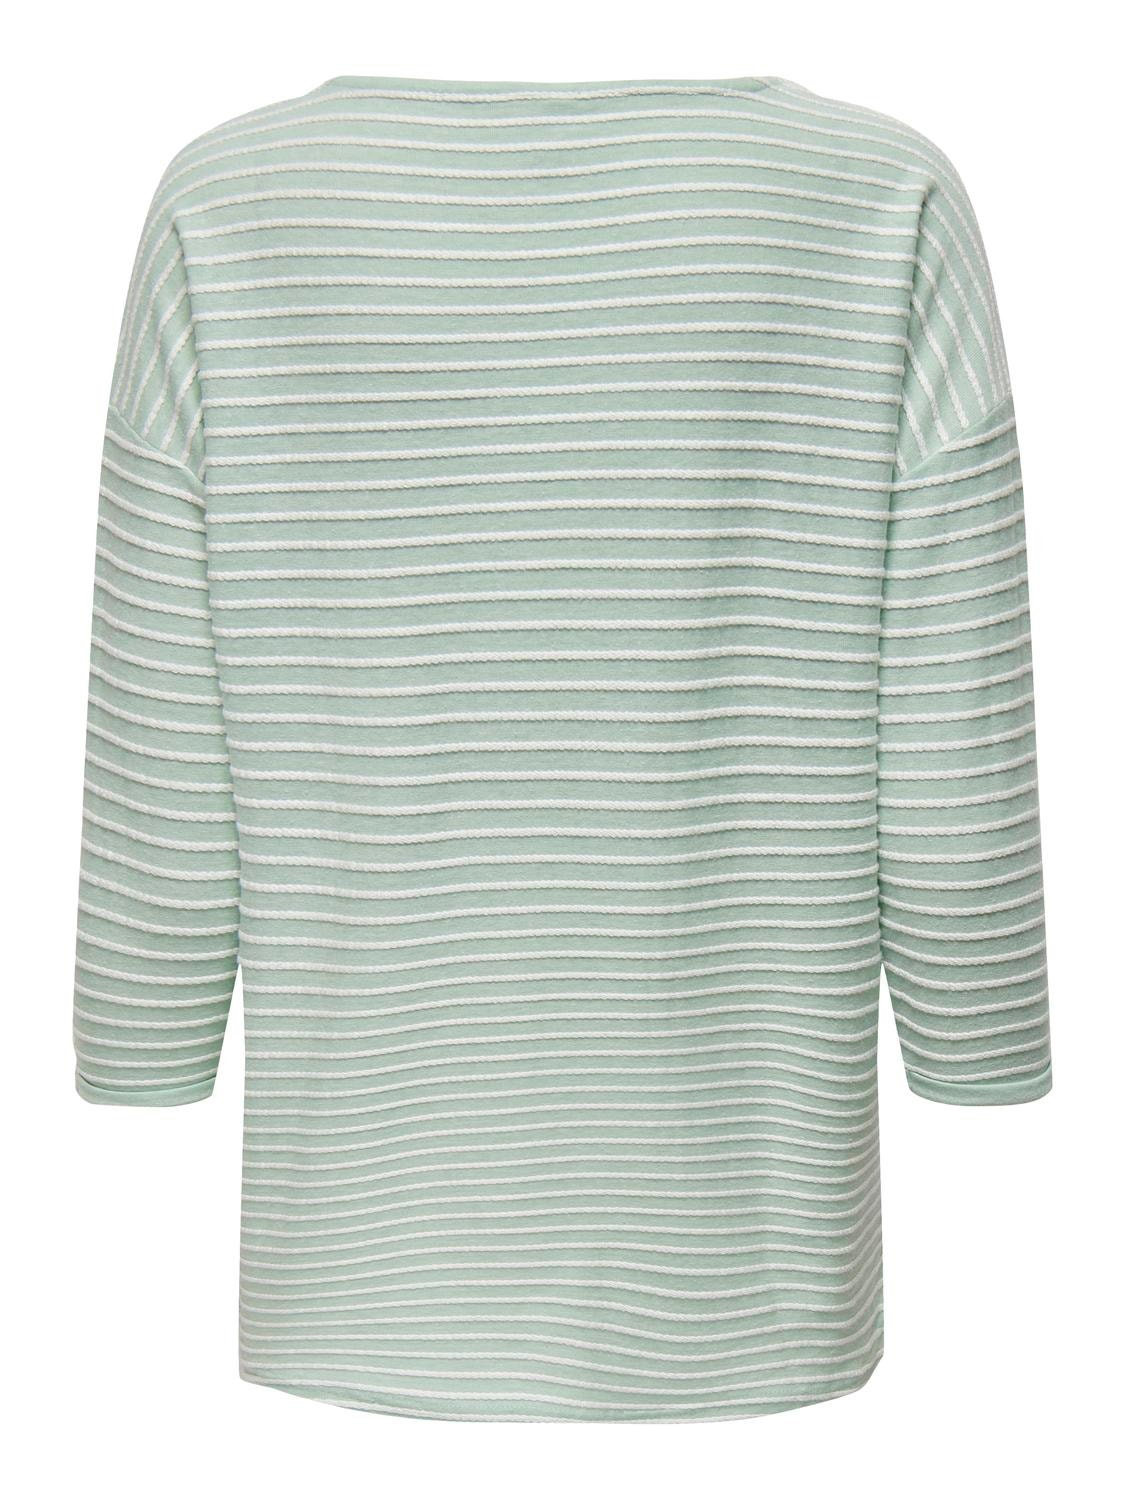 ONLY Boatneck 3/4 sleeved top -Frosty Green - 15173186